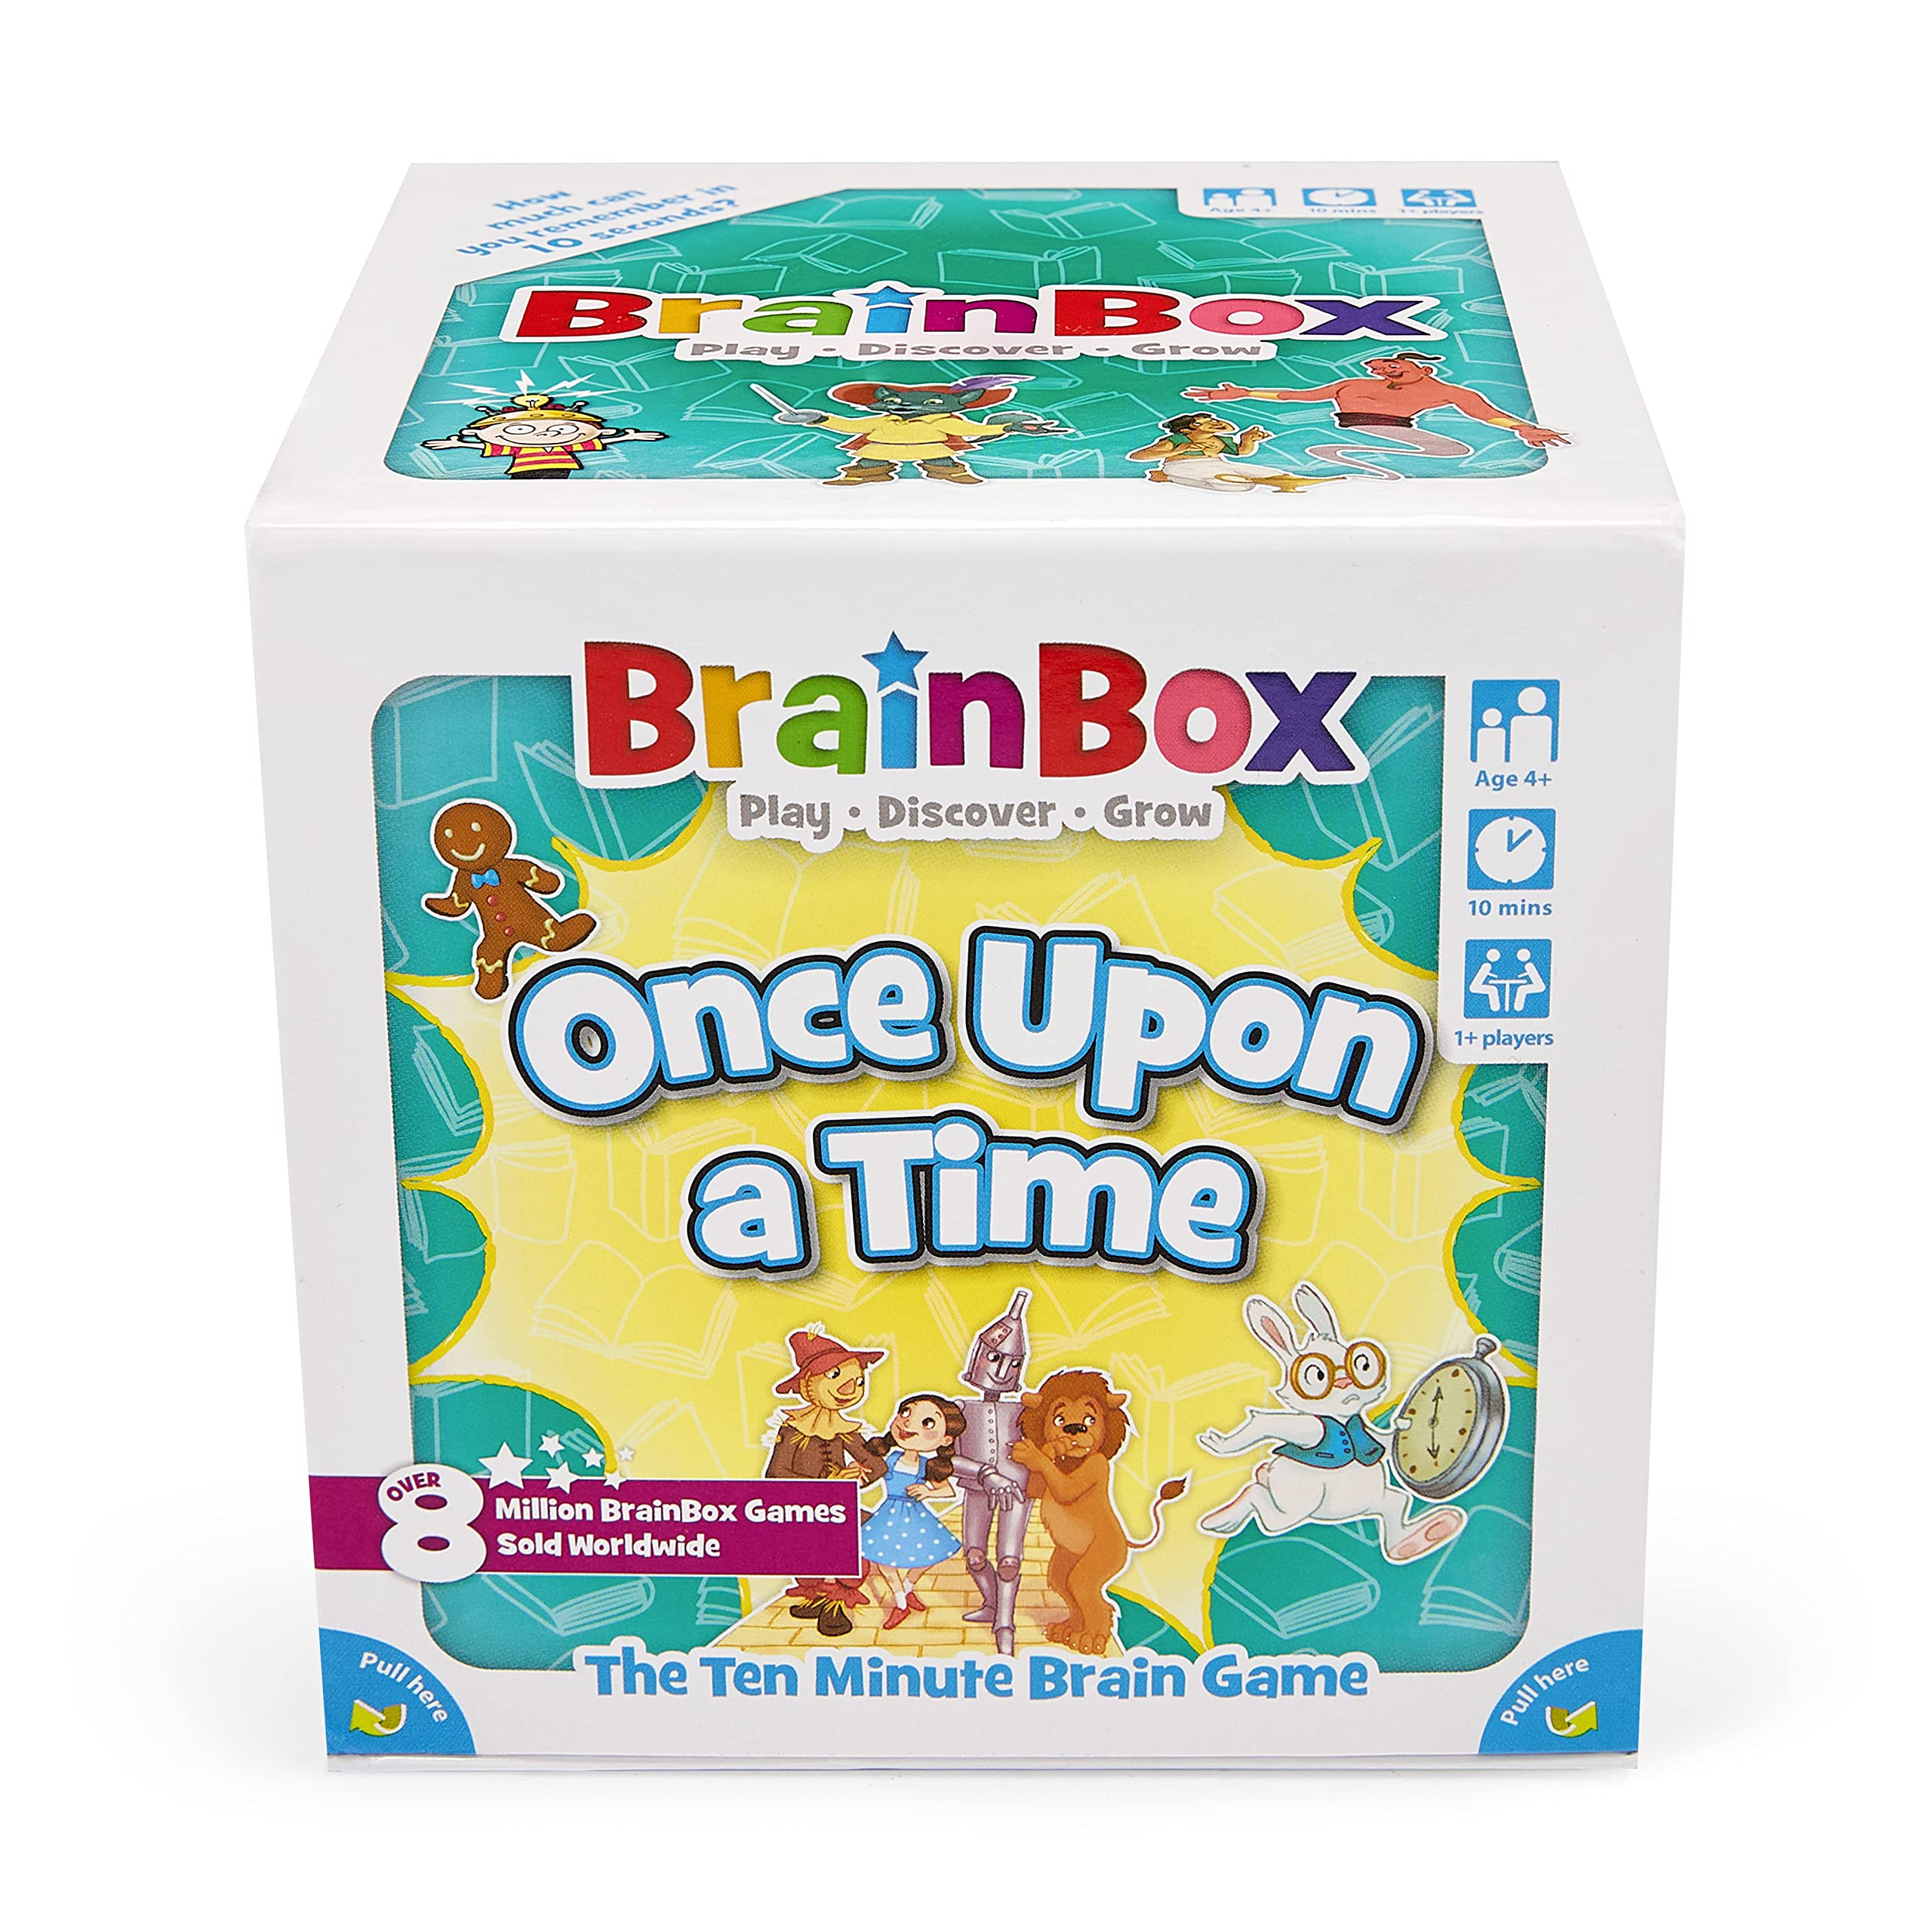 BrainBox Once Upon a Time Card Game | Trivia Game | Fun Game for Family Game Night | Memory Game for Kids and Adults | Ages 8+ | 1+ Players | Average Playtime 10 Minutes | Made by Green Board Games